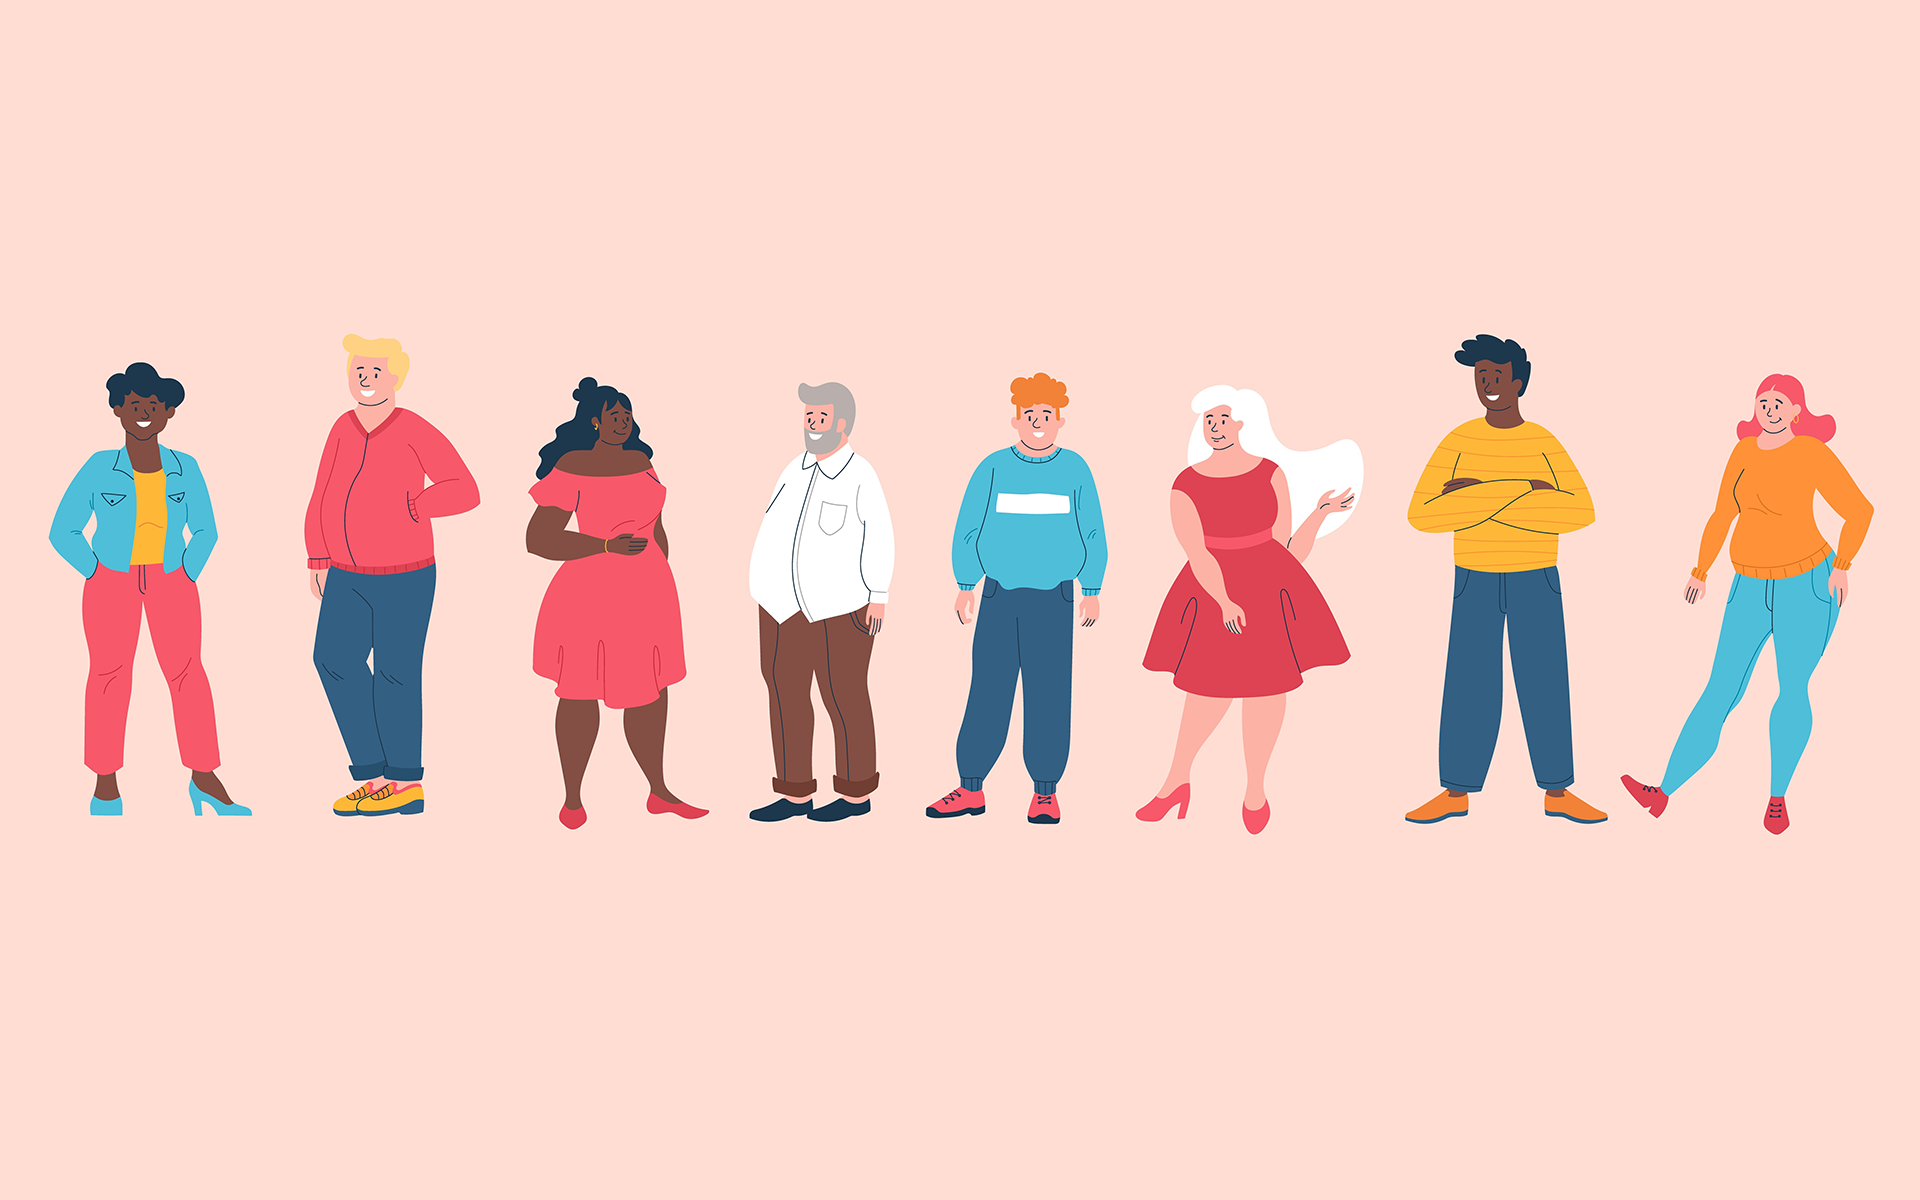 5 Ways to Shift from Diet Culture to Loving Your Body —Illustration of 8 people who are diverse in race, age, shape, and gender presentation stand in a line wearing colourful clothes, with a light pink background.